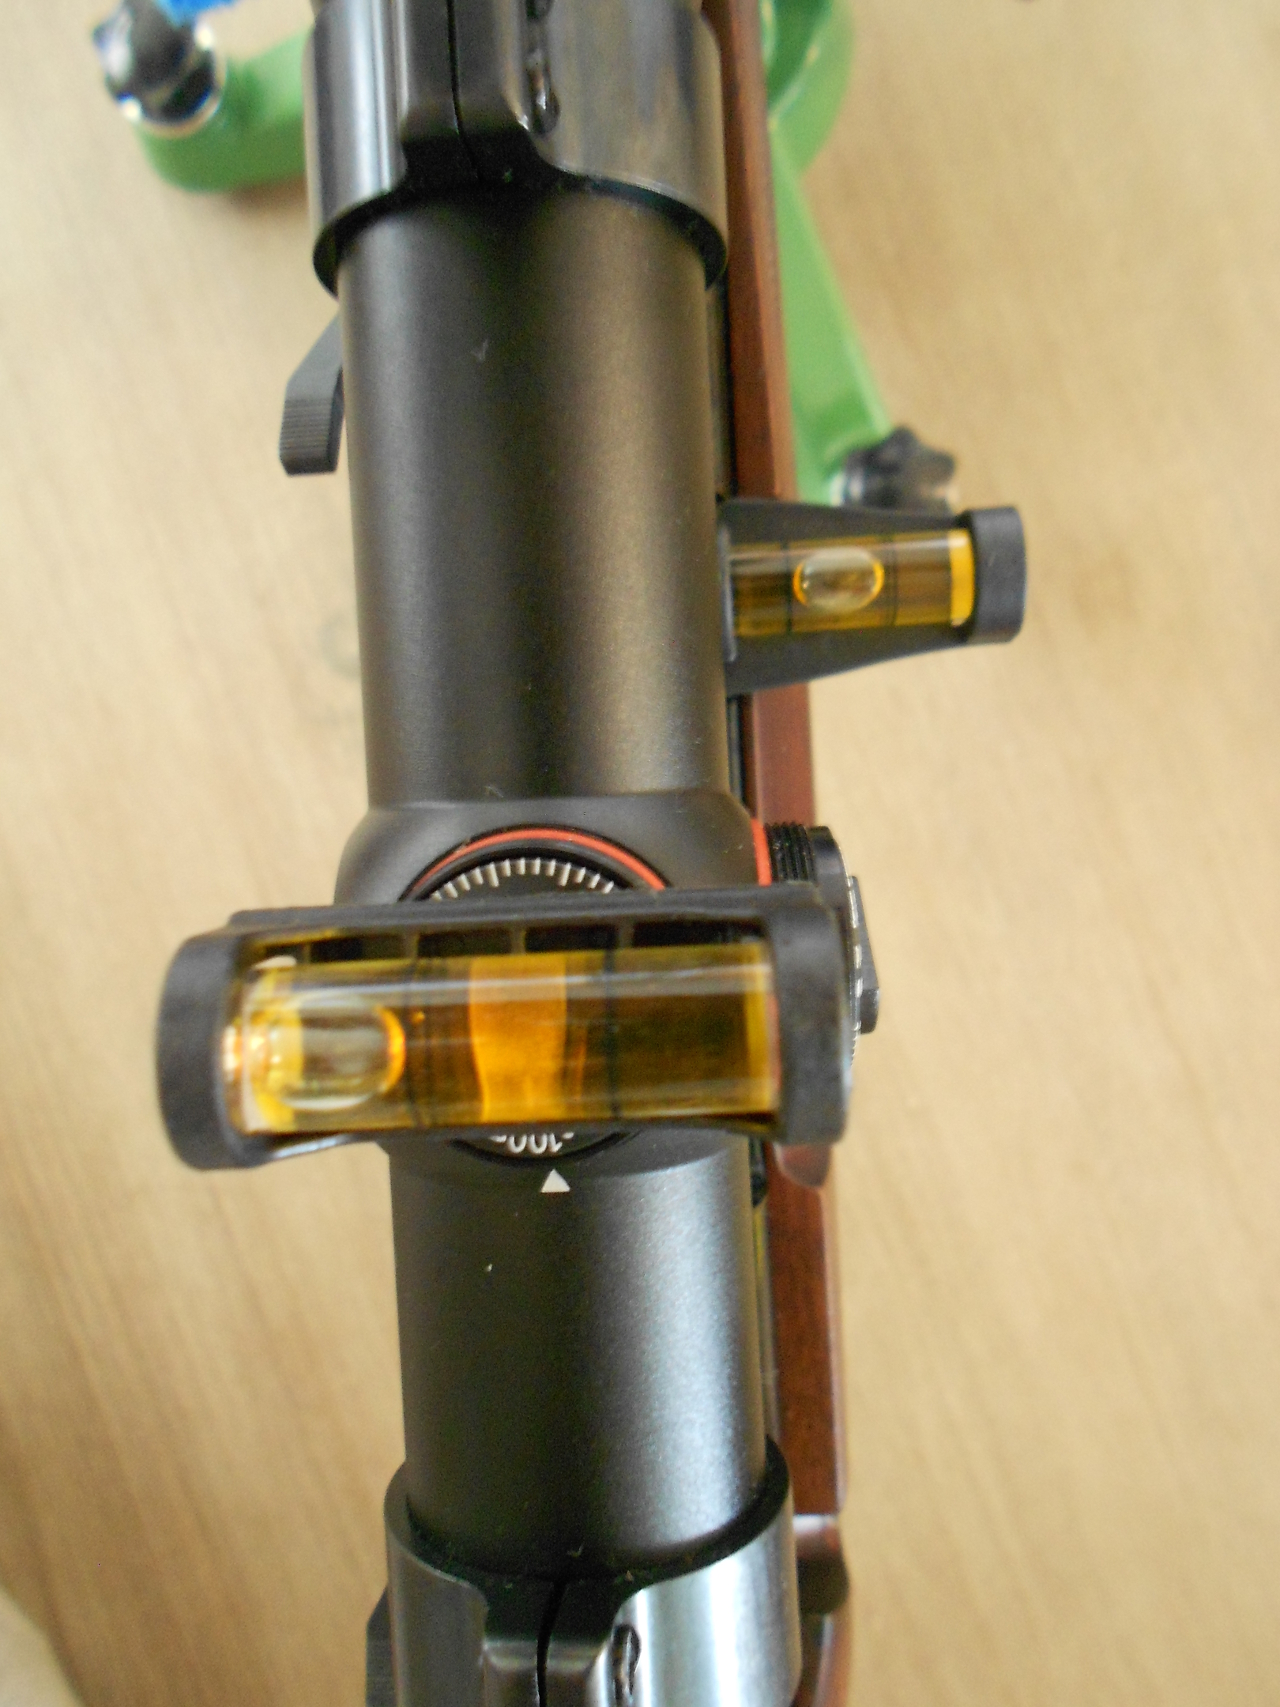 With the Wheeler Engineering Level-Level-Level it is possible to accurately determine if a rifle-scope is mounted level with the action. By comparing the lower spirit level which shows the action is level we can compare with the upper spirit level mounted on the rifle-scope elevation adjustment knob. In this photo we can tell that the rifle-scope is leaning to the right and is not level.